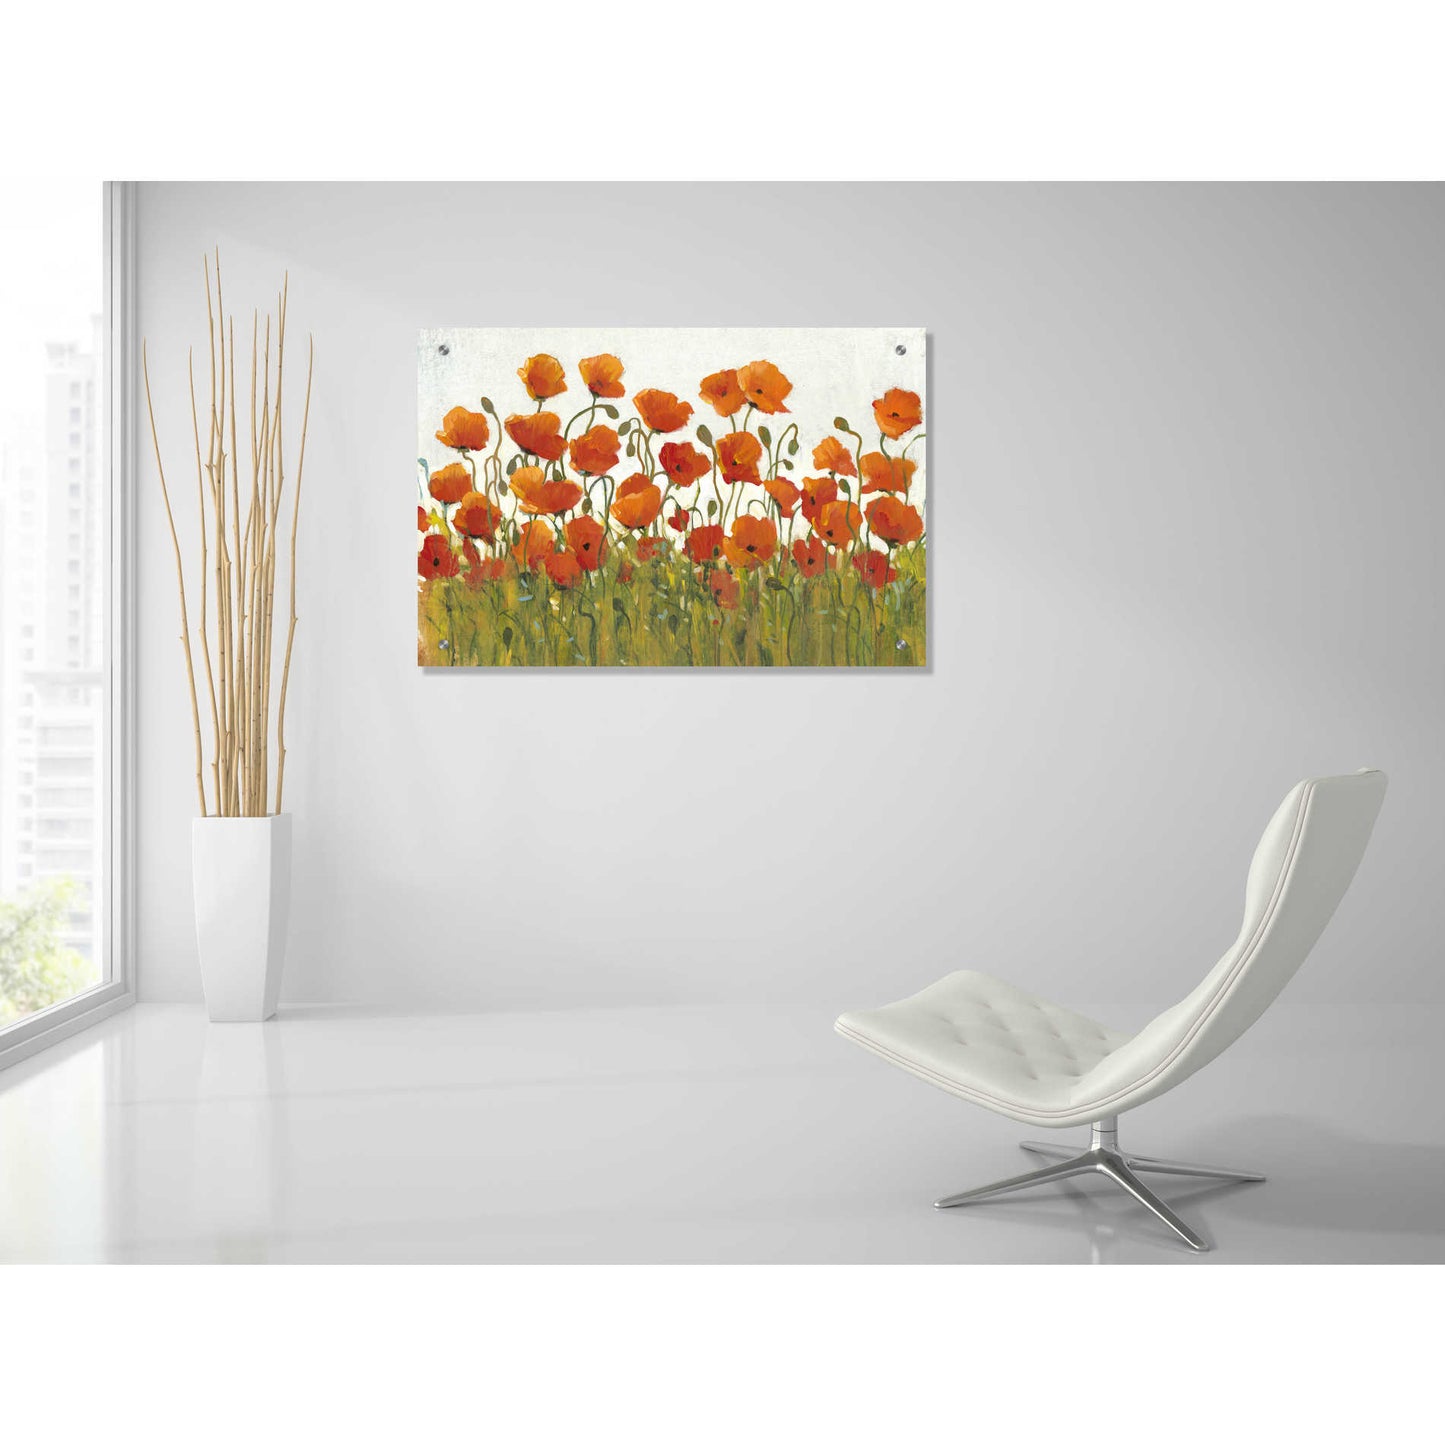 Epic Art 'Rows of Poppies I' by Tim O'Toole, Acrylic Glass Wall Art,36x24